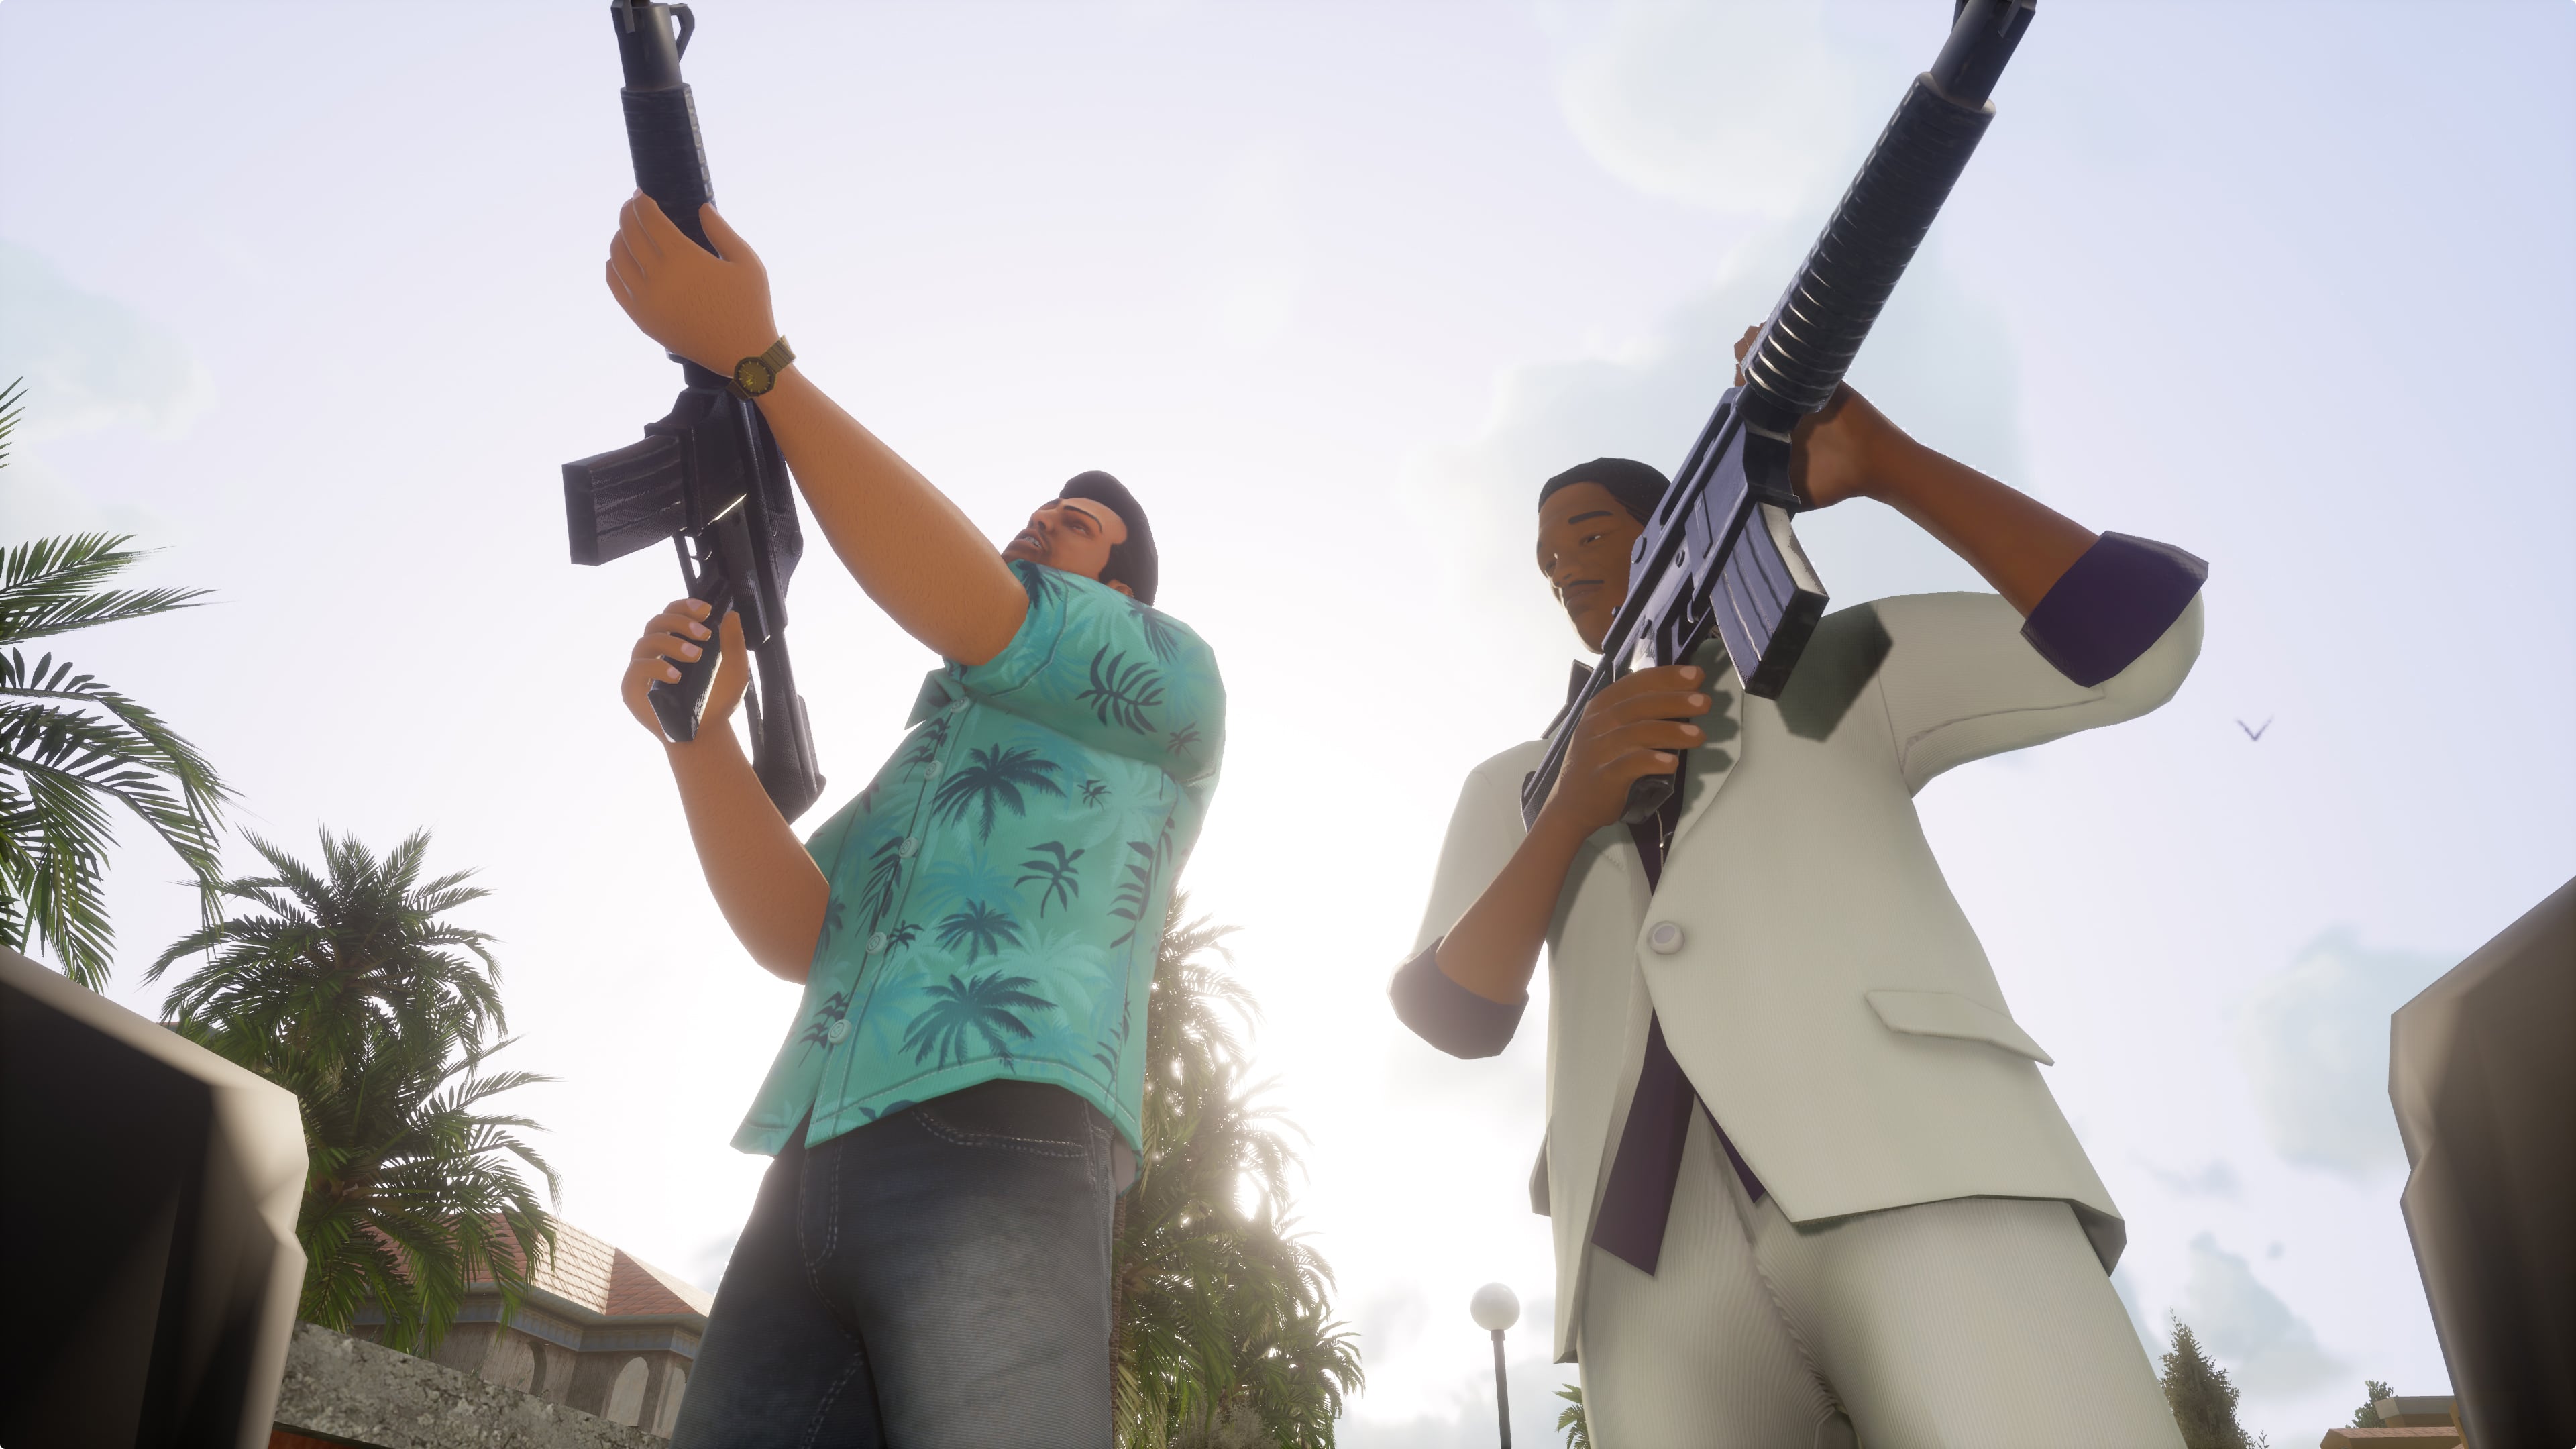 GTA Series Videos on X: GTA: The Trilogy – The Definitive Edition  Screenshots Comparison Check out the full video here:   #GTATrilogy #RockstarGames   / X